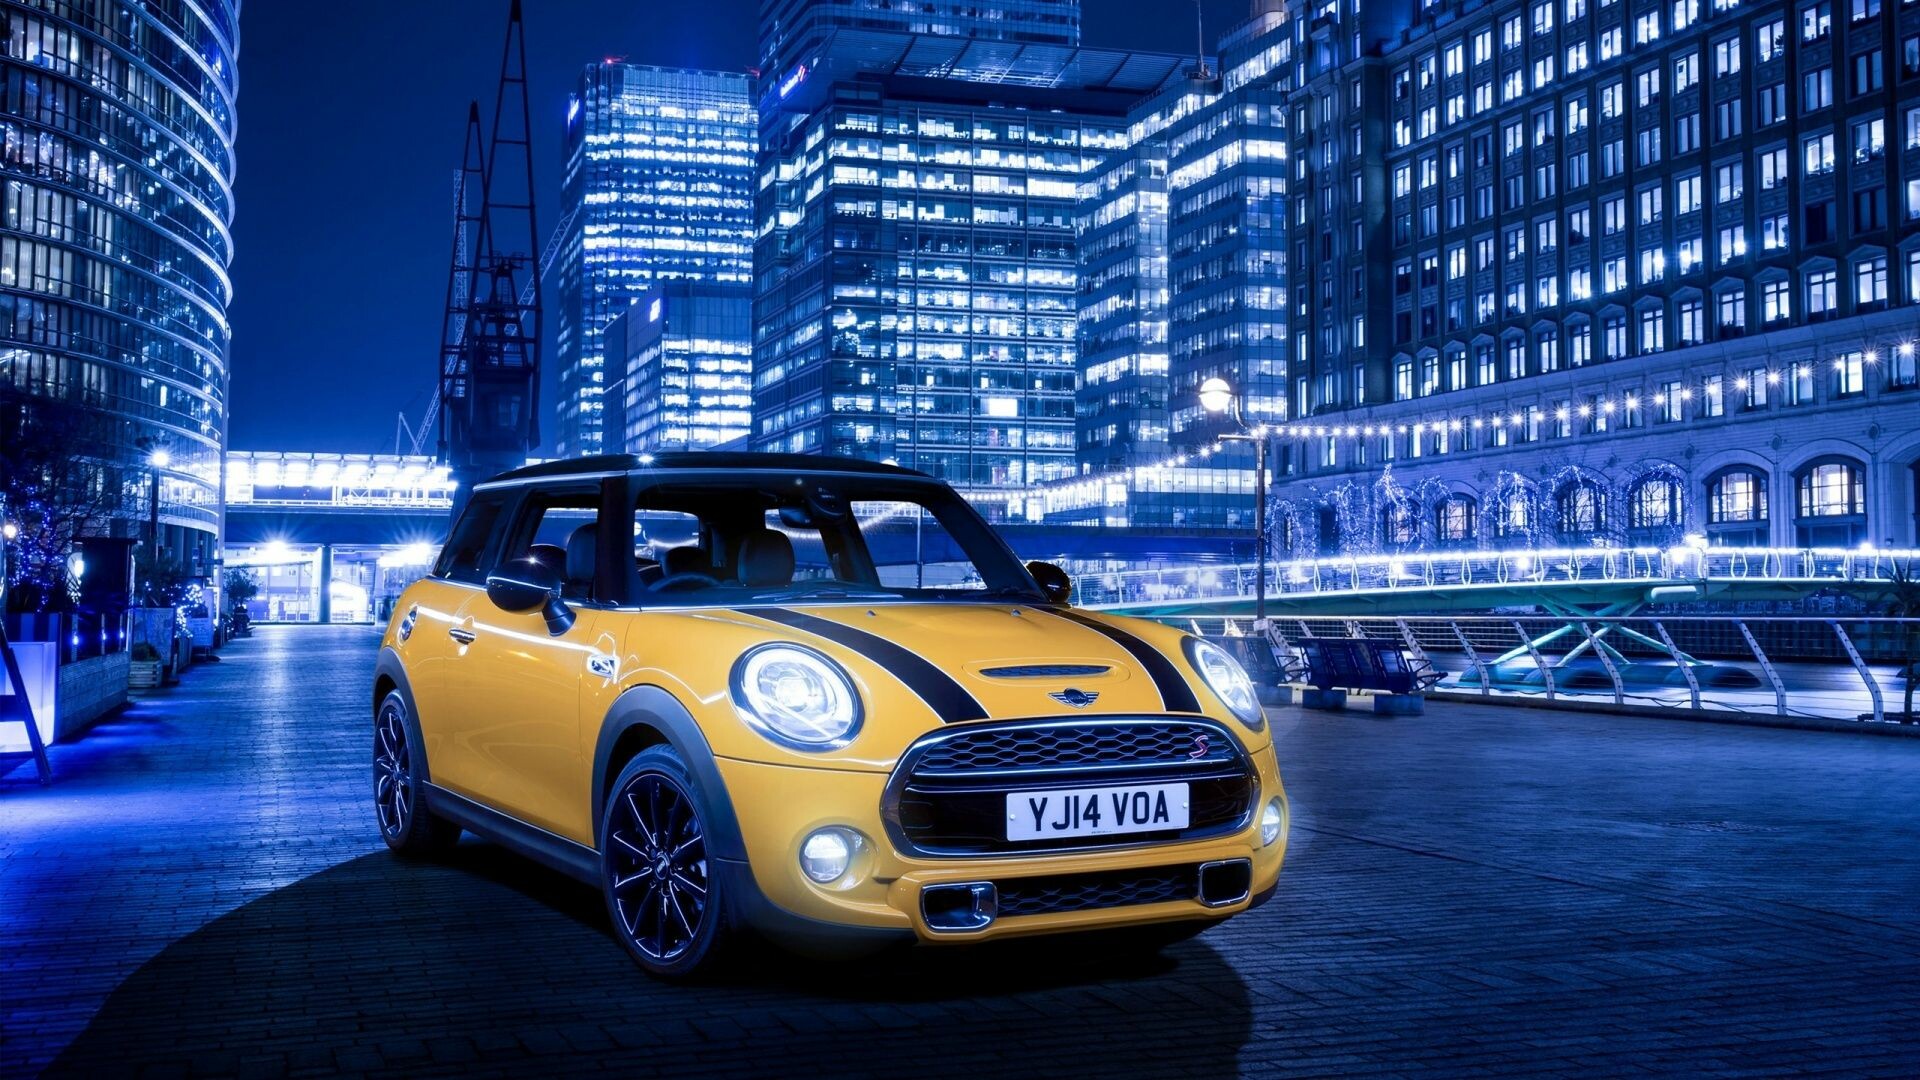 MINI Cooper: The Clubman is an estate model, introduced for the 2008 model year. 1920x1080 Full HD Wallpaper.